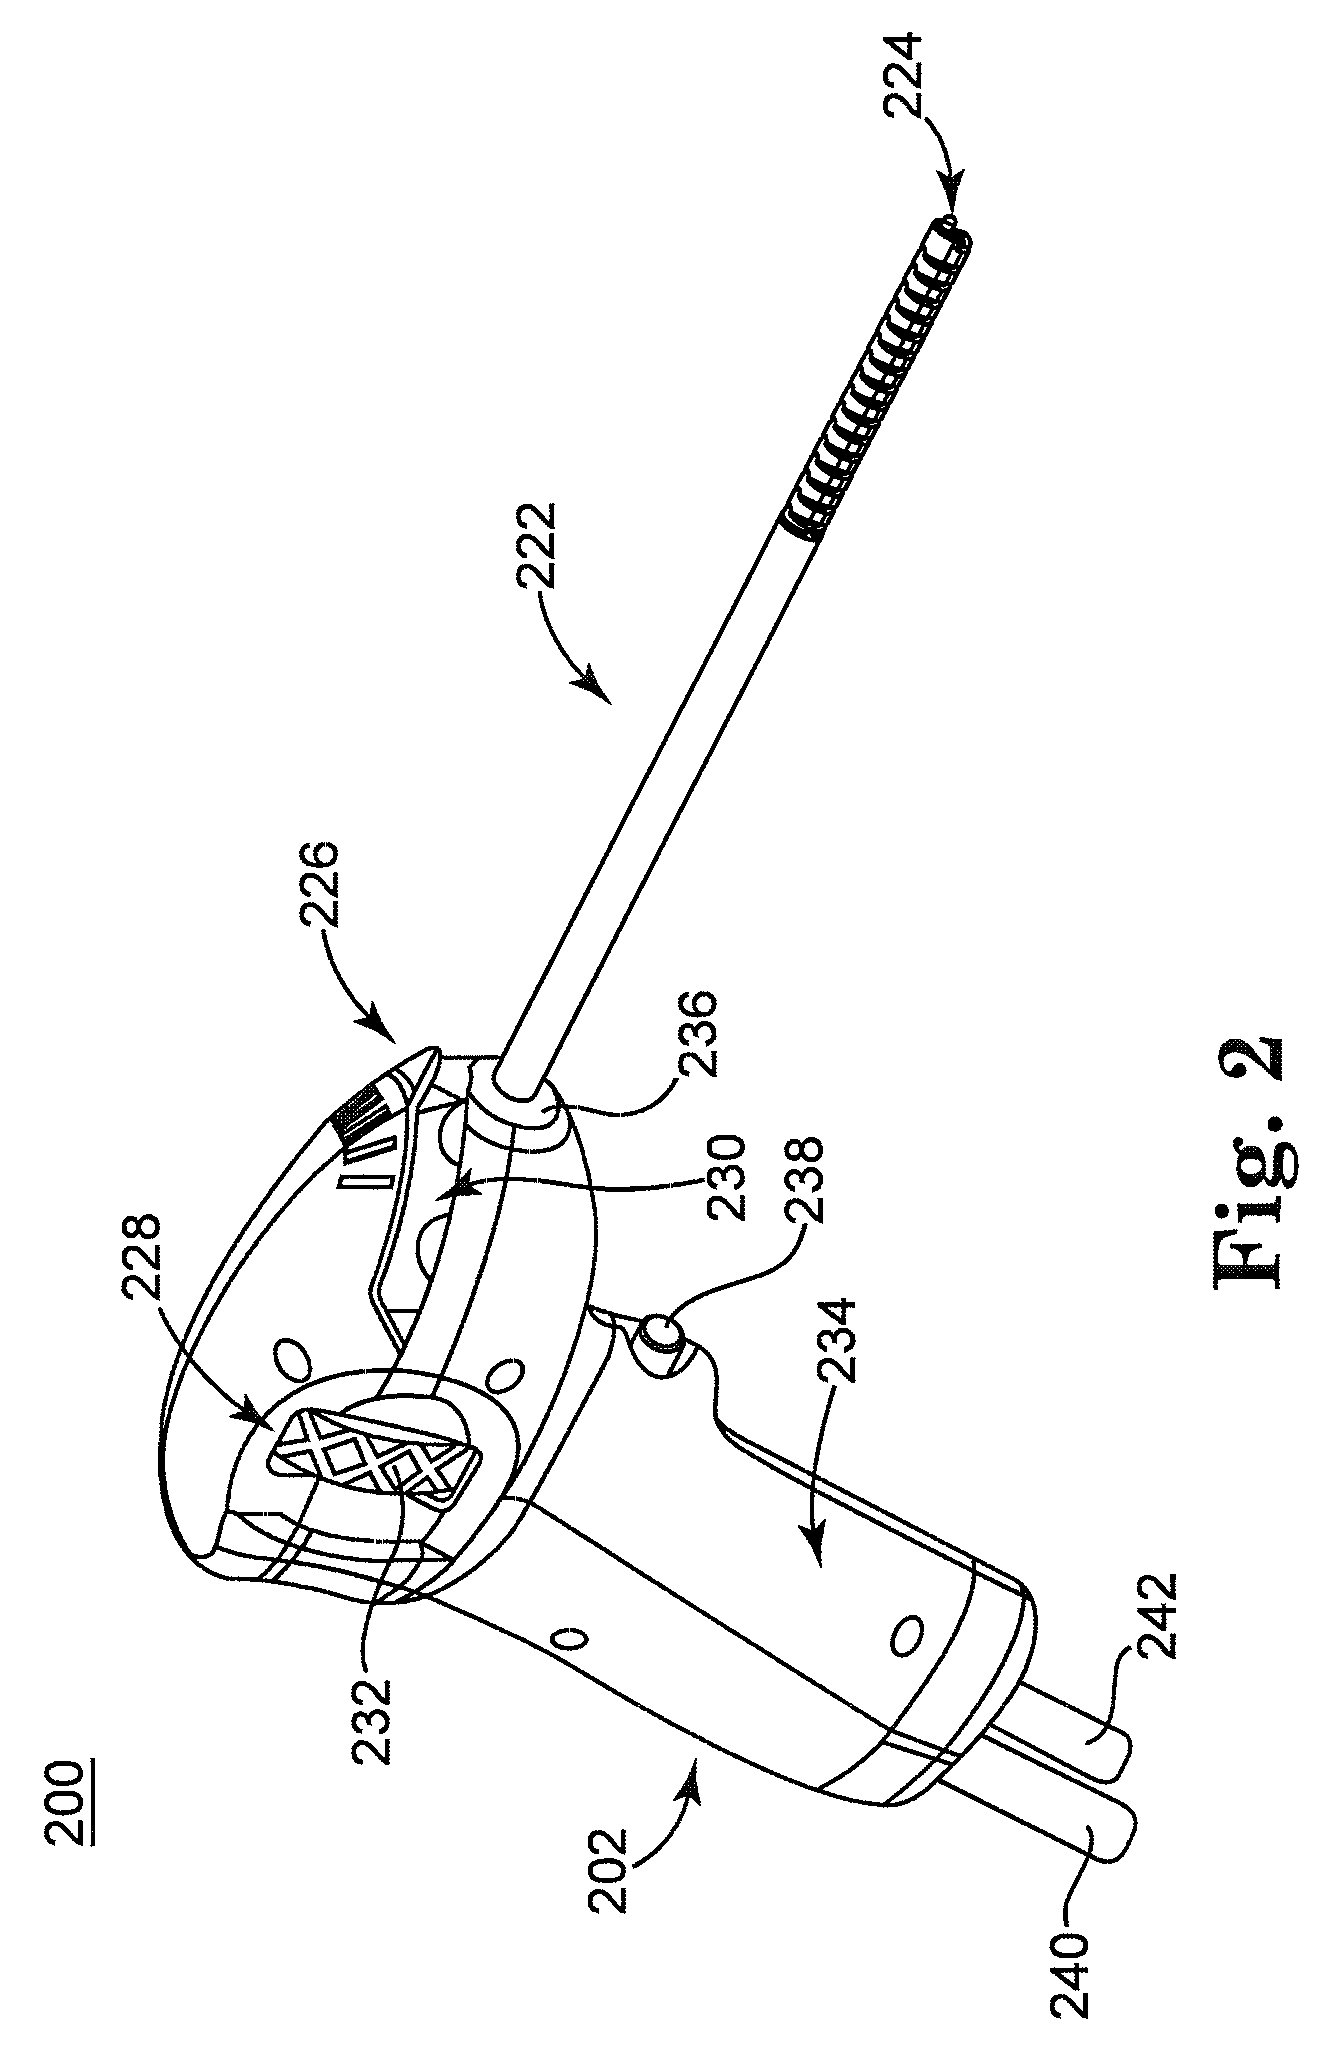 Solvating system and sealant for medical use in the sinuses and nasal passages